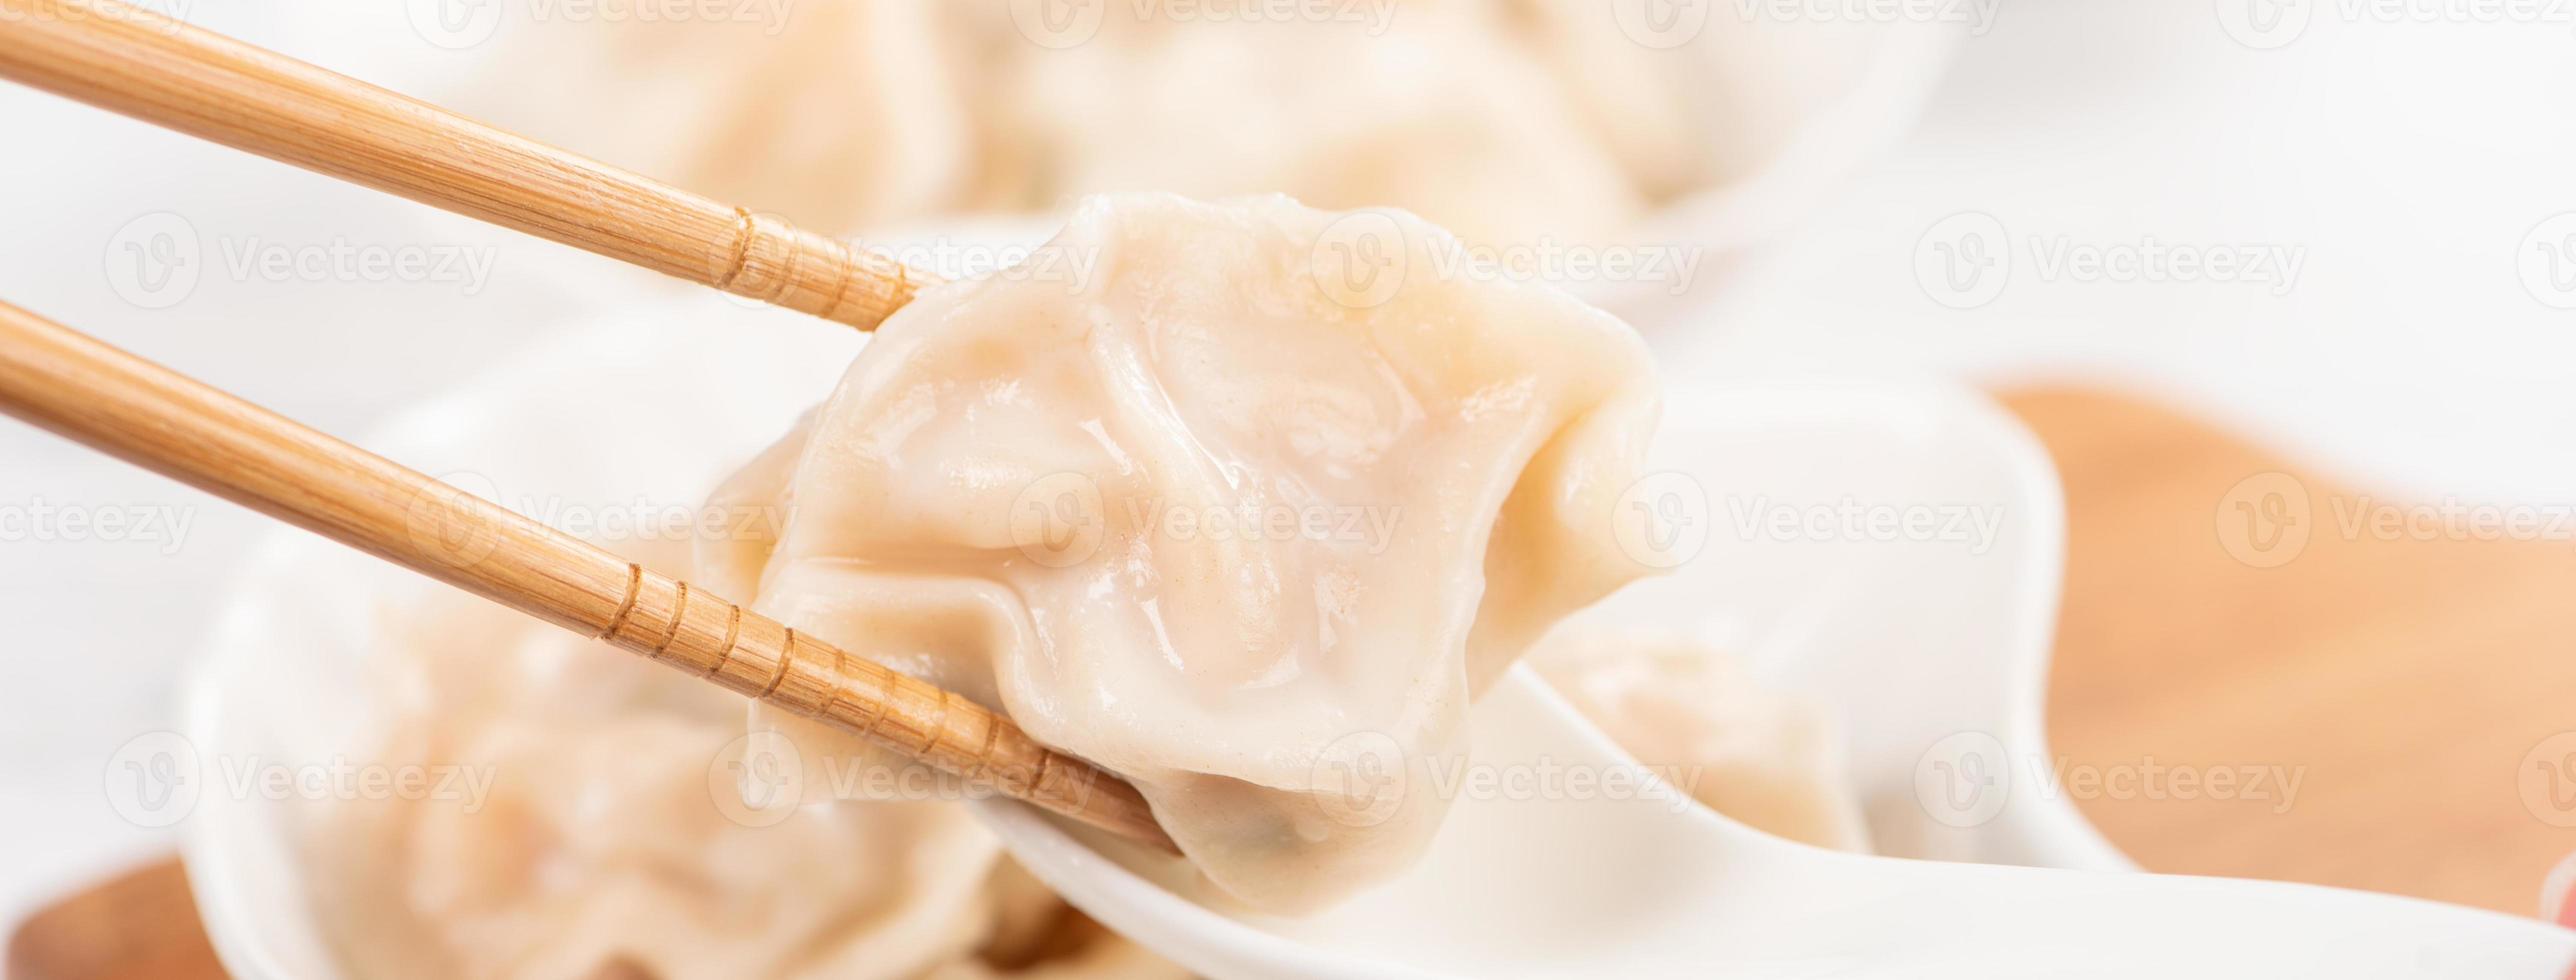 Fresh, delicious boiled pork, shrimp gyoza dumplings on white background with soy sauce and chopsticks, close up, lifestyle. Homemade design concept. photo